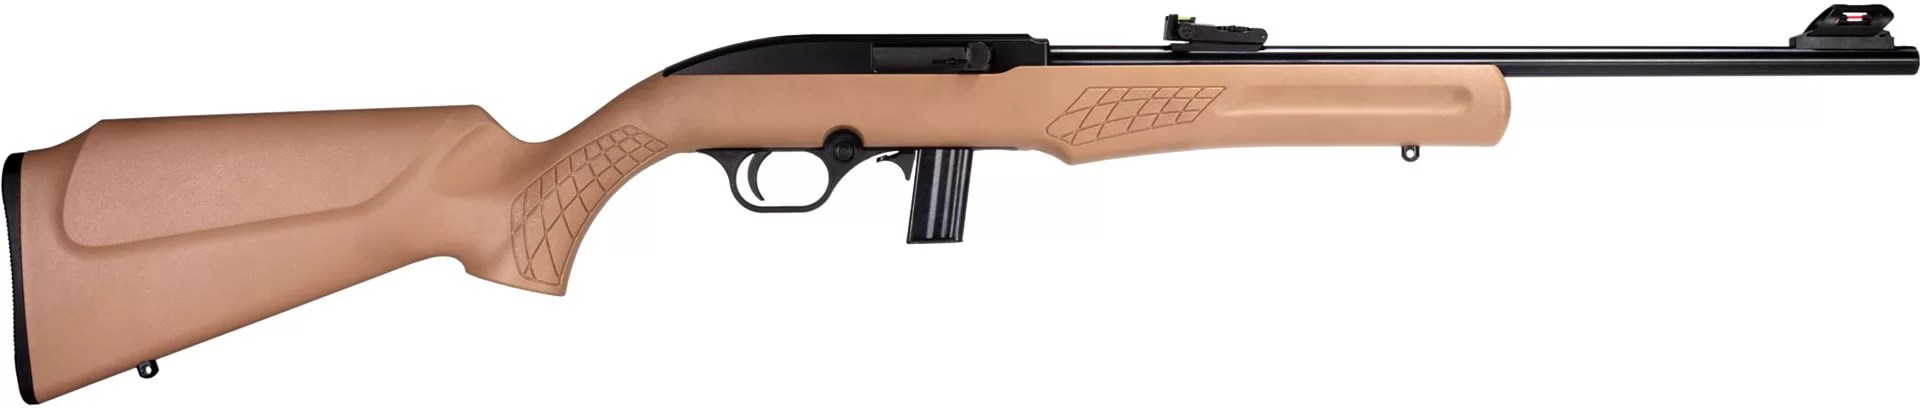 Rossi RS22 right-side view FDE tan color semi-automatic rifle on white background